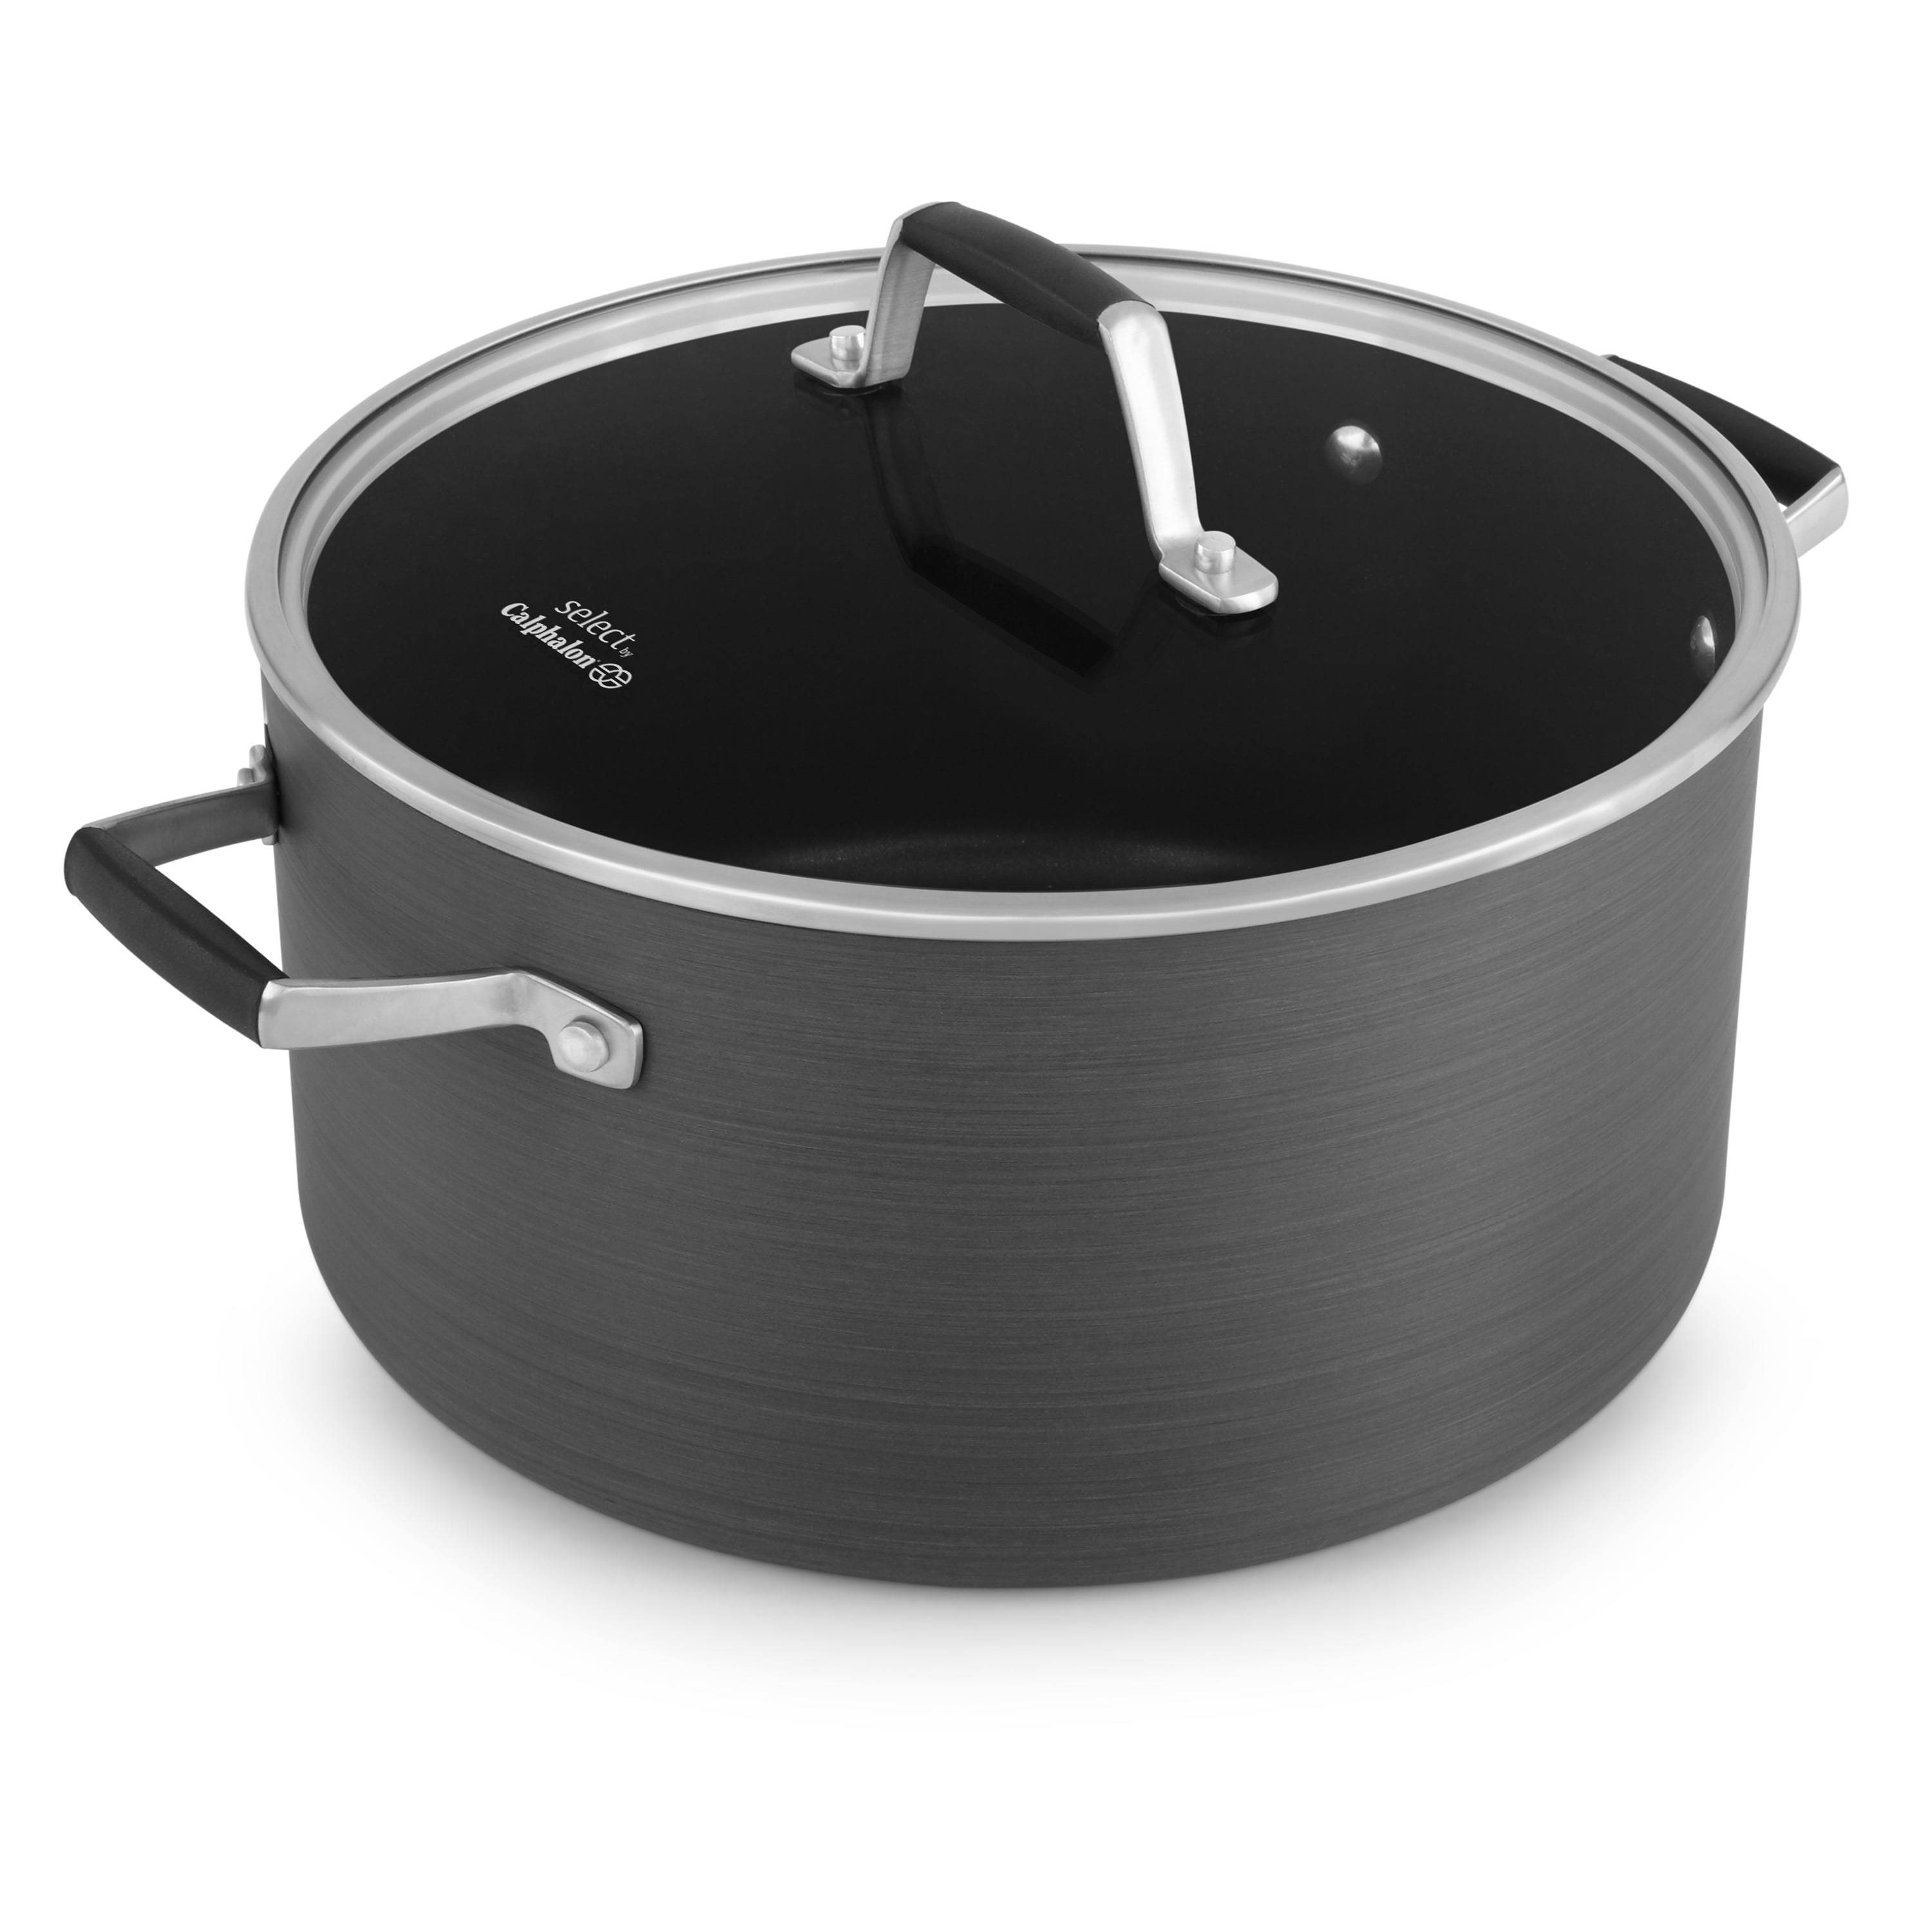 Select by Calphalon Hard-Anodized Nonstick 8-Quart Stock Pot with Cover - W...